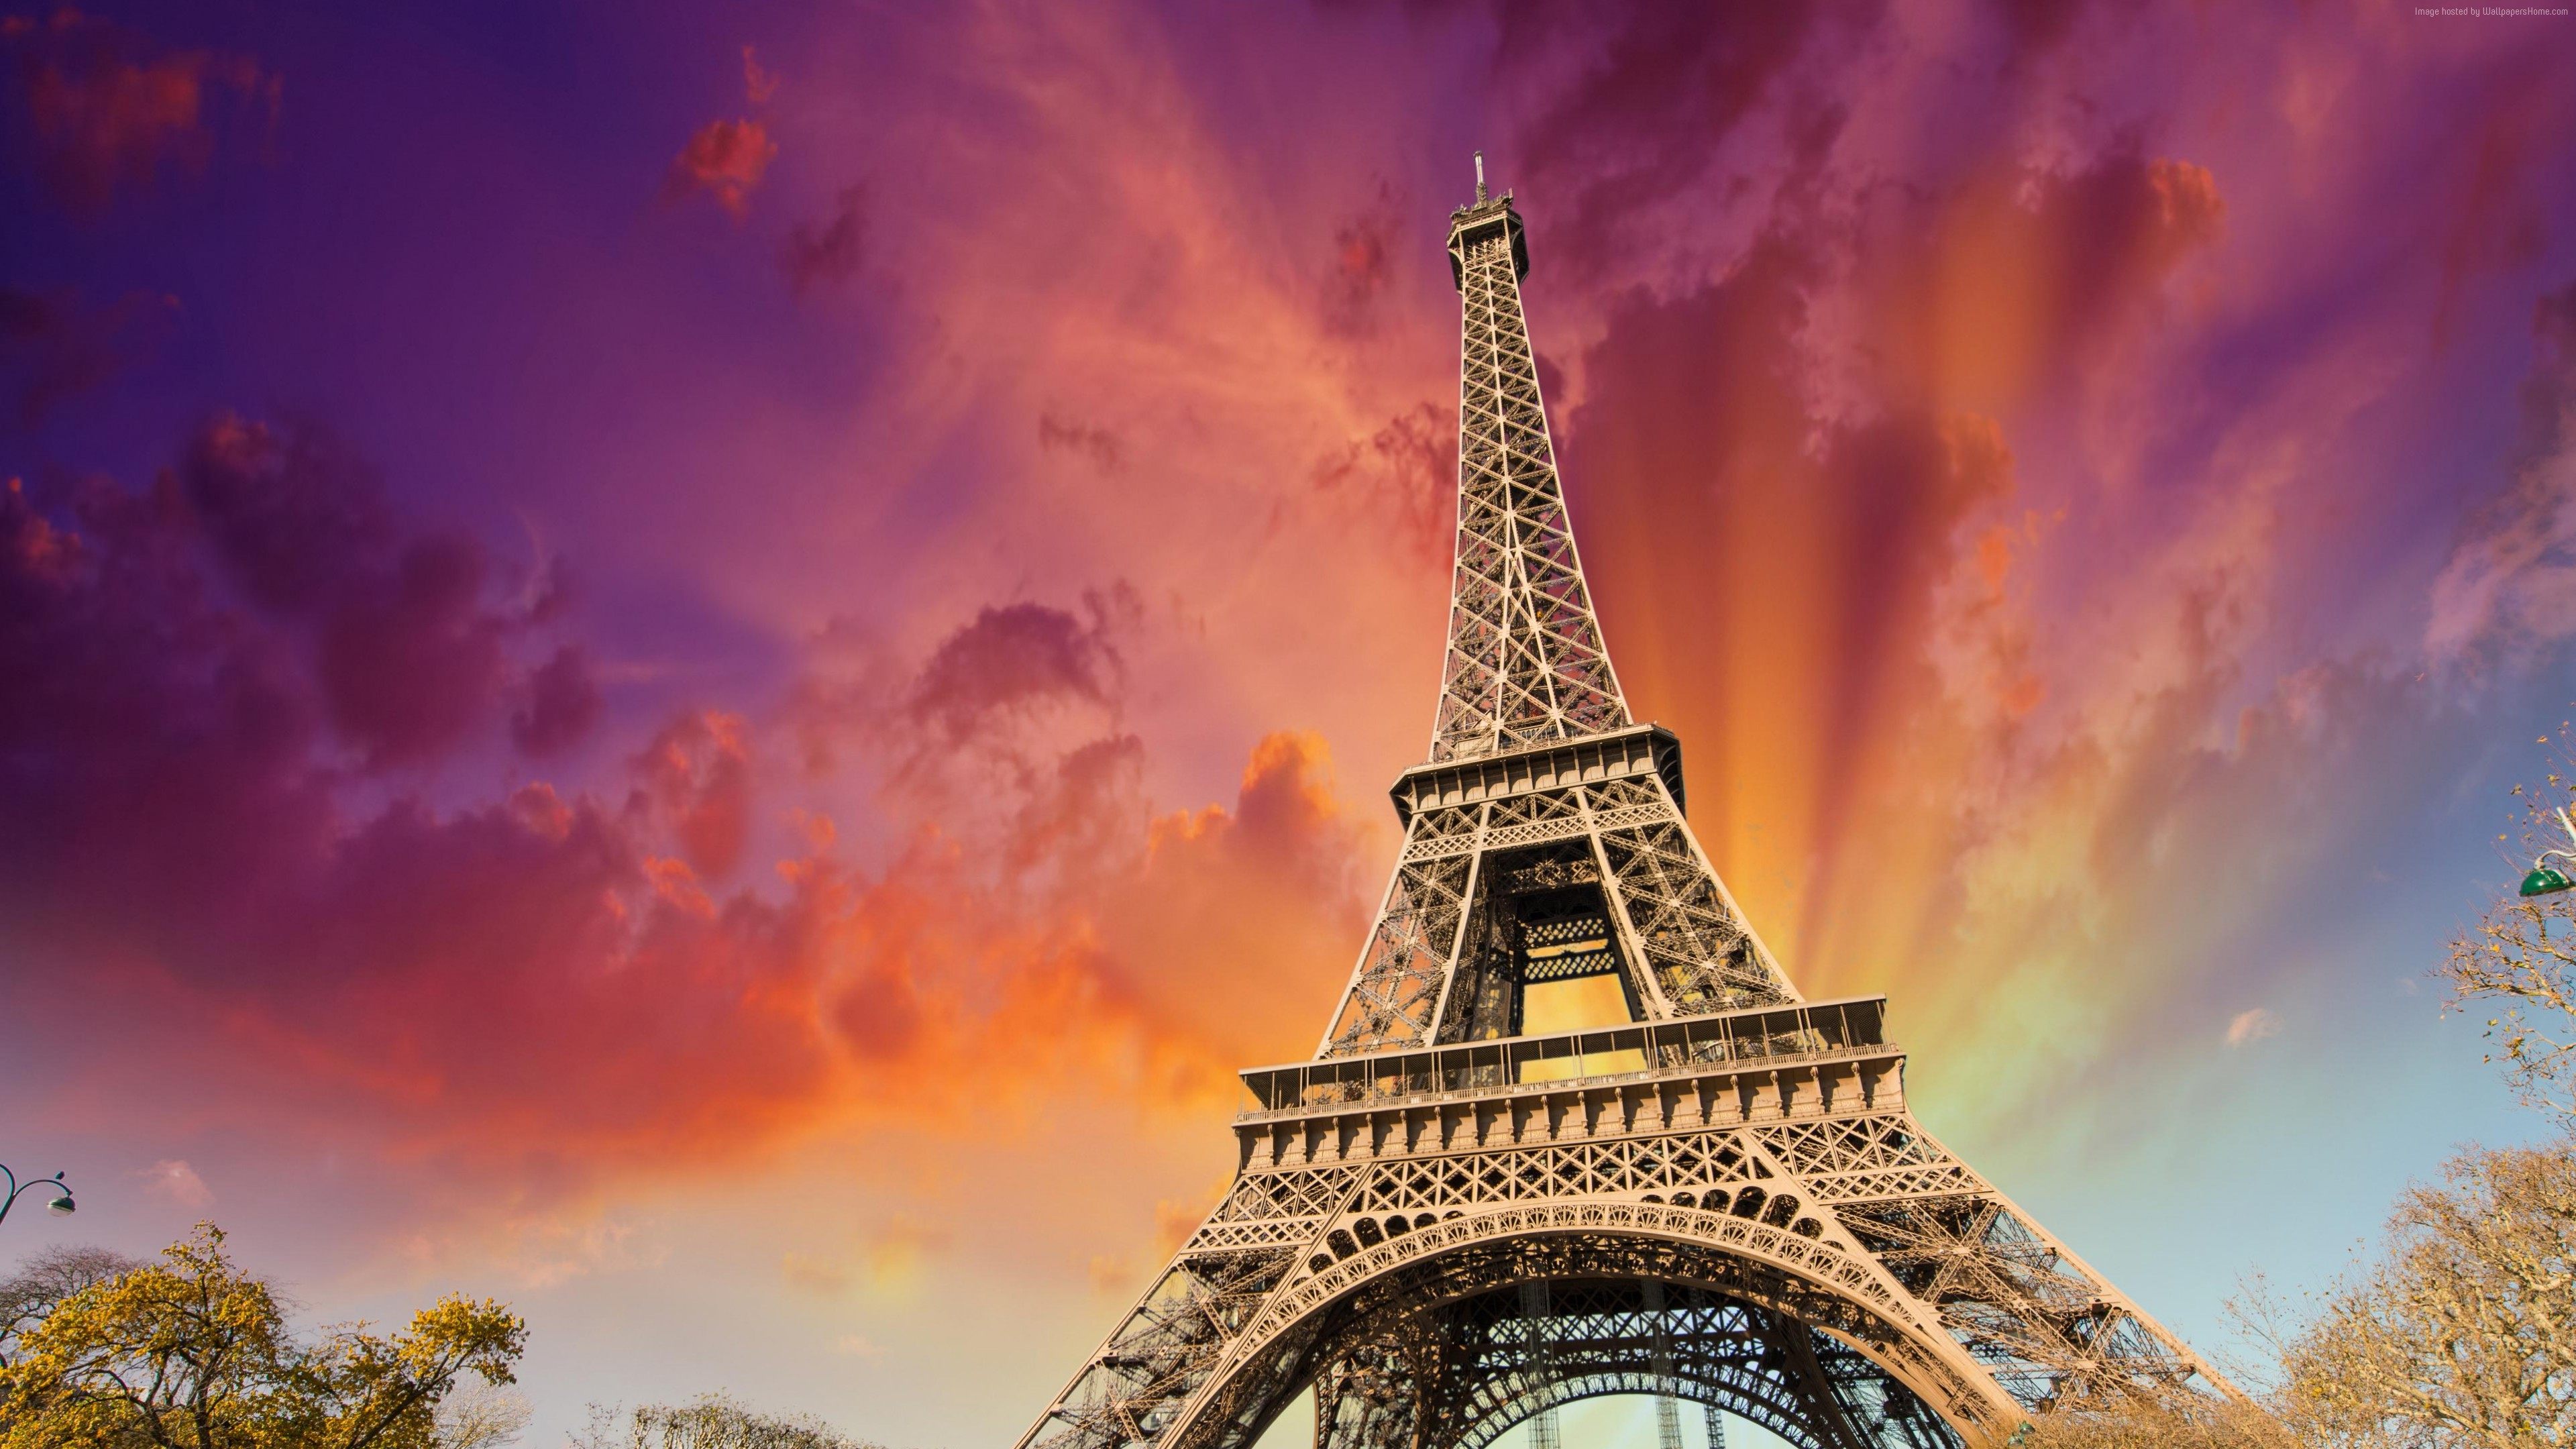 Colorful Eiffel Tower Wallpaper Galleryhip The